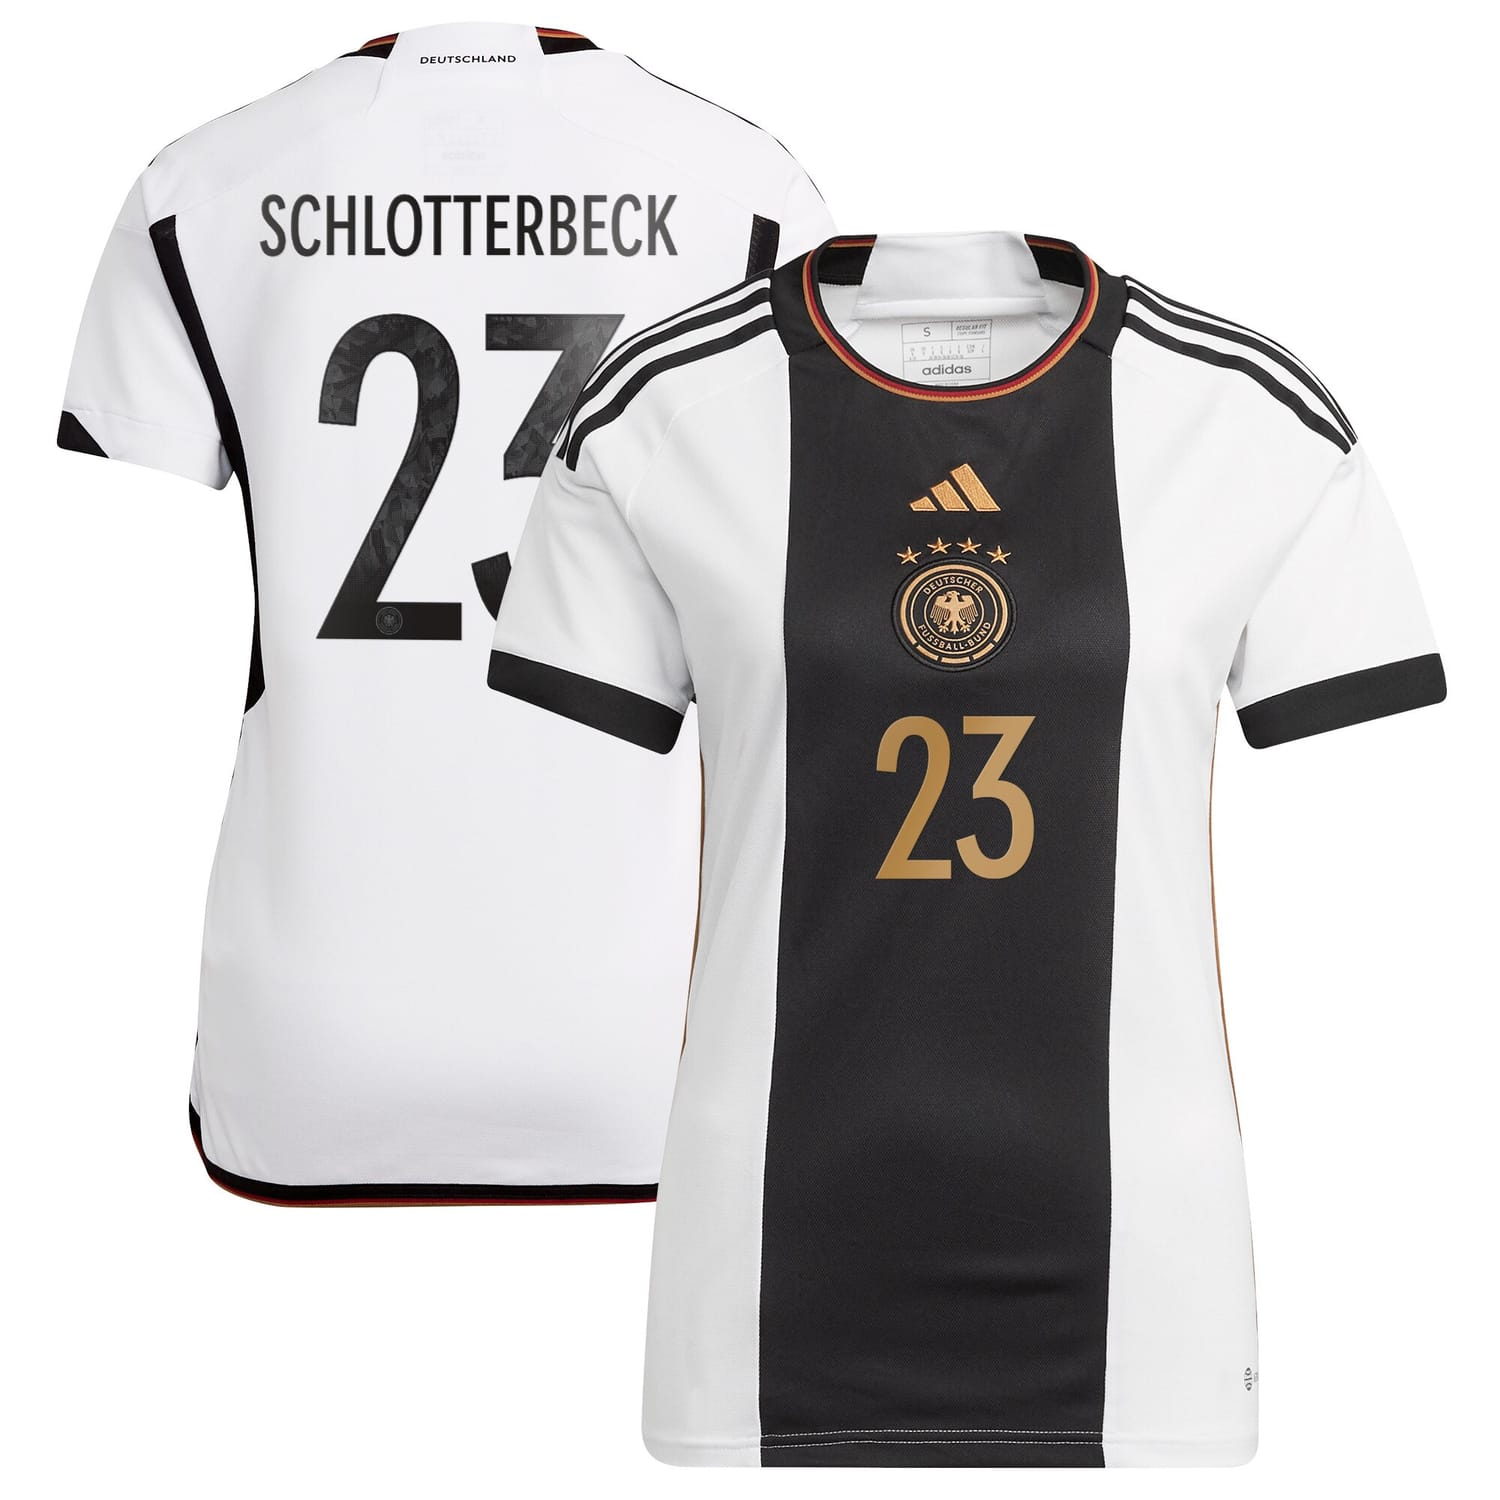 Germany National Team Home Jersey Shirt player Nico Schlotterbeck 23 printing for Women